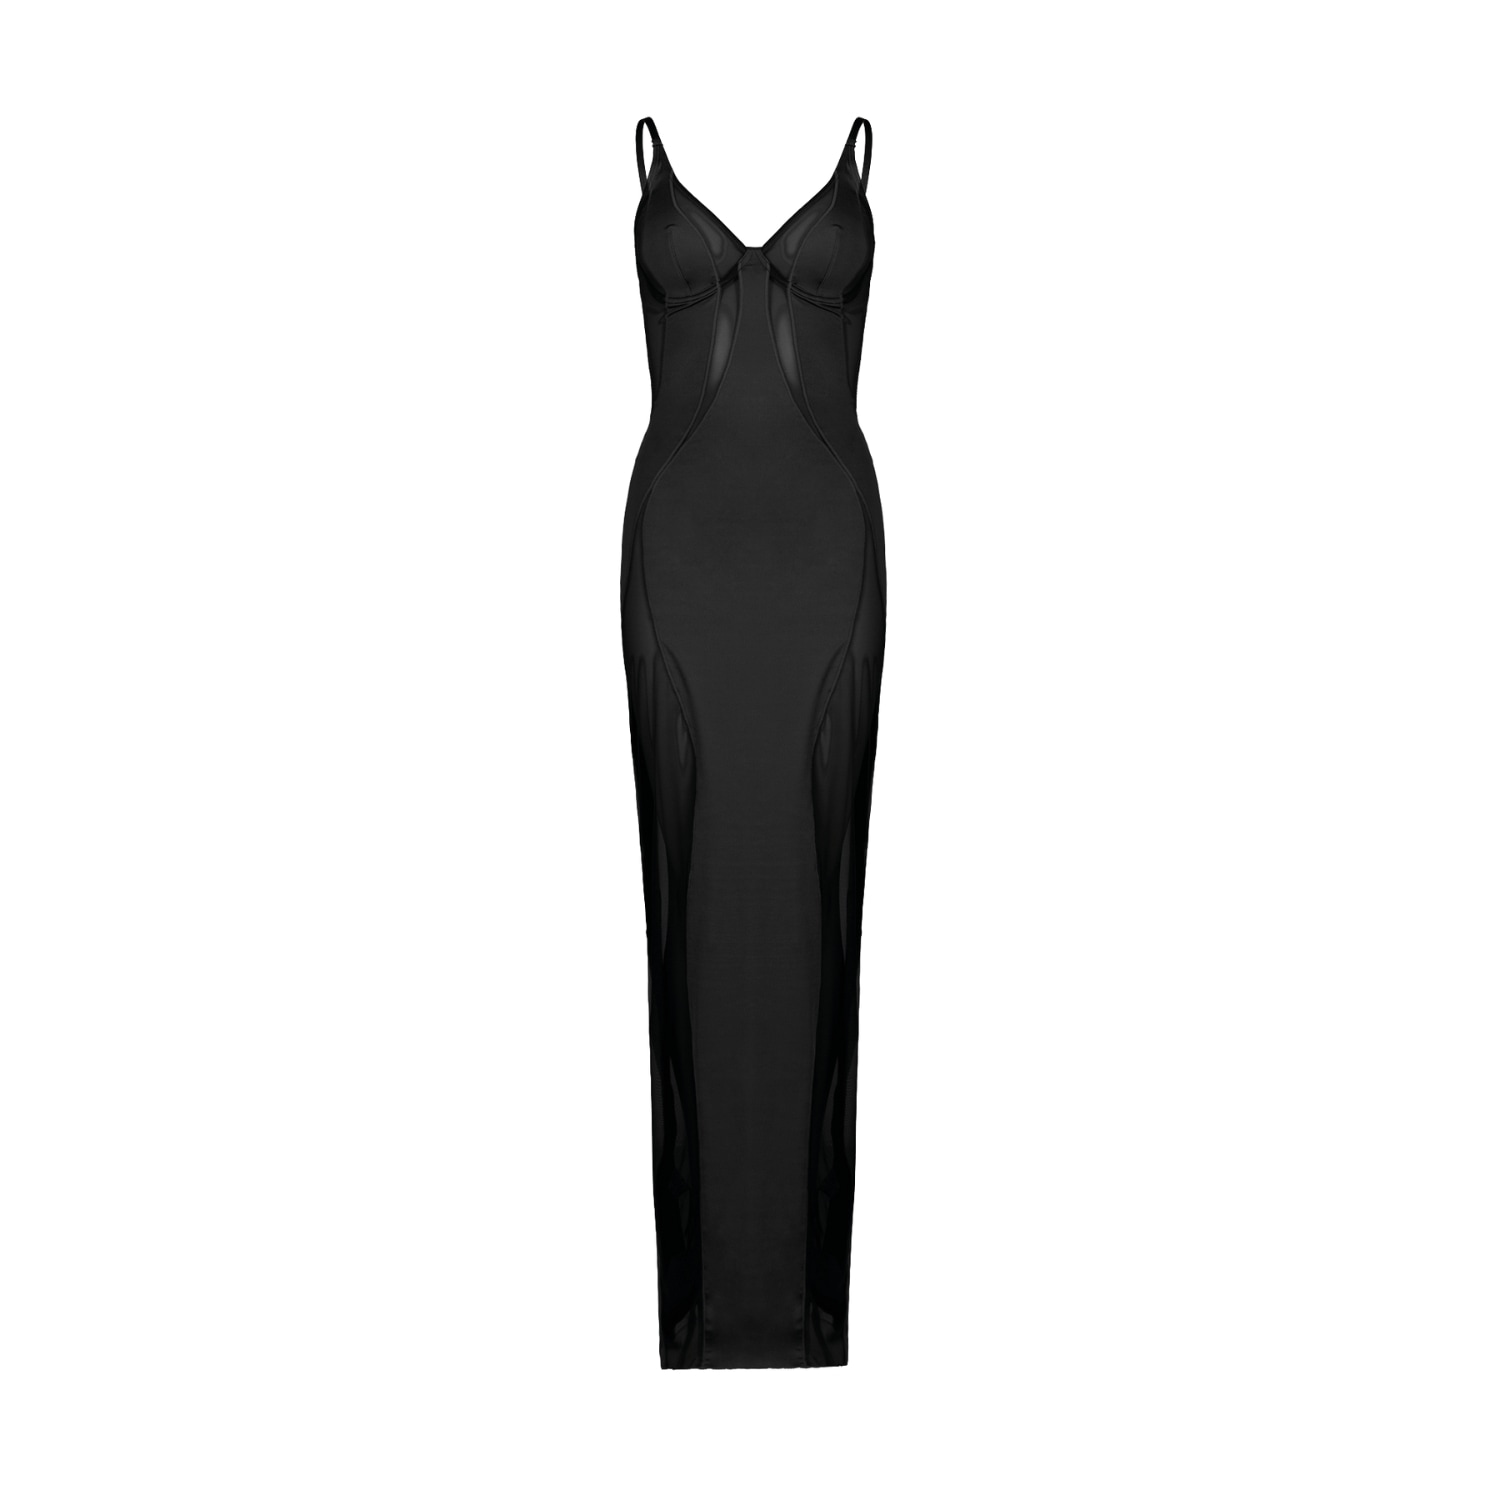 Shop Ow Collection Women's Swirl Black Maxi Dress With Mesh Details